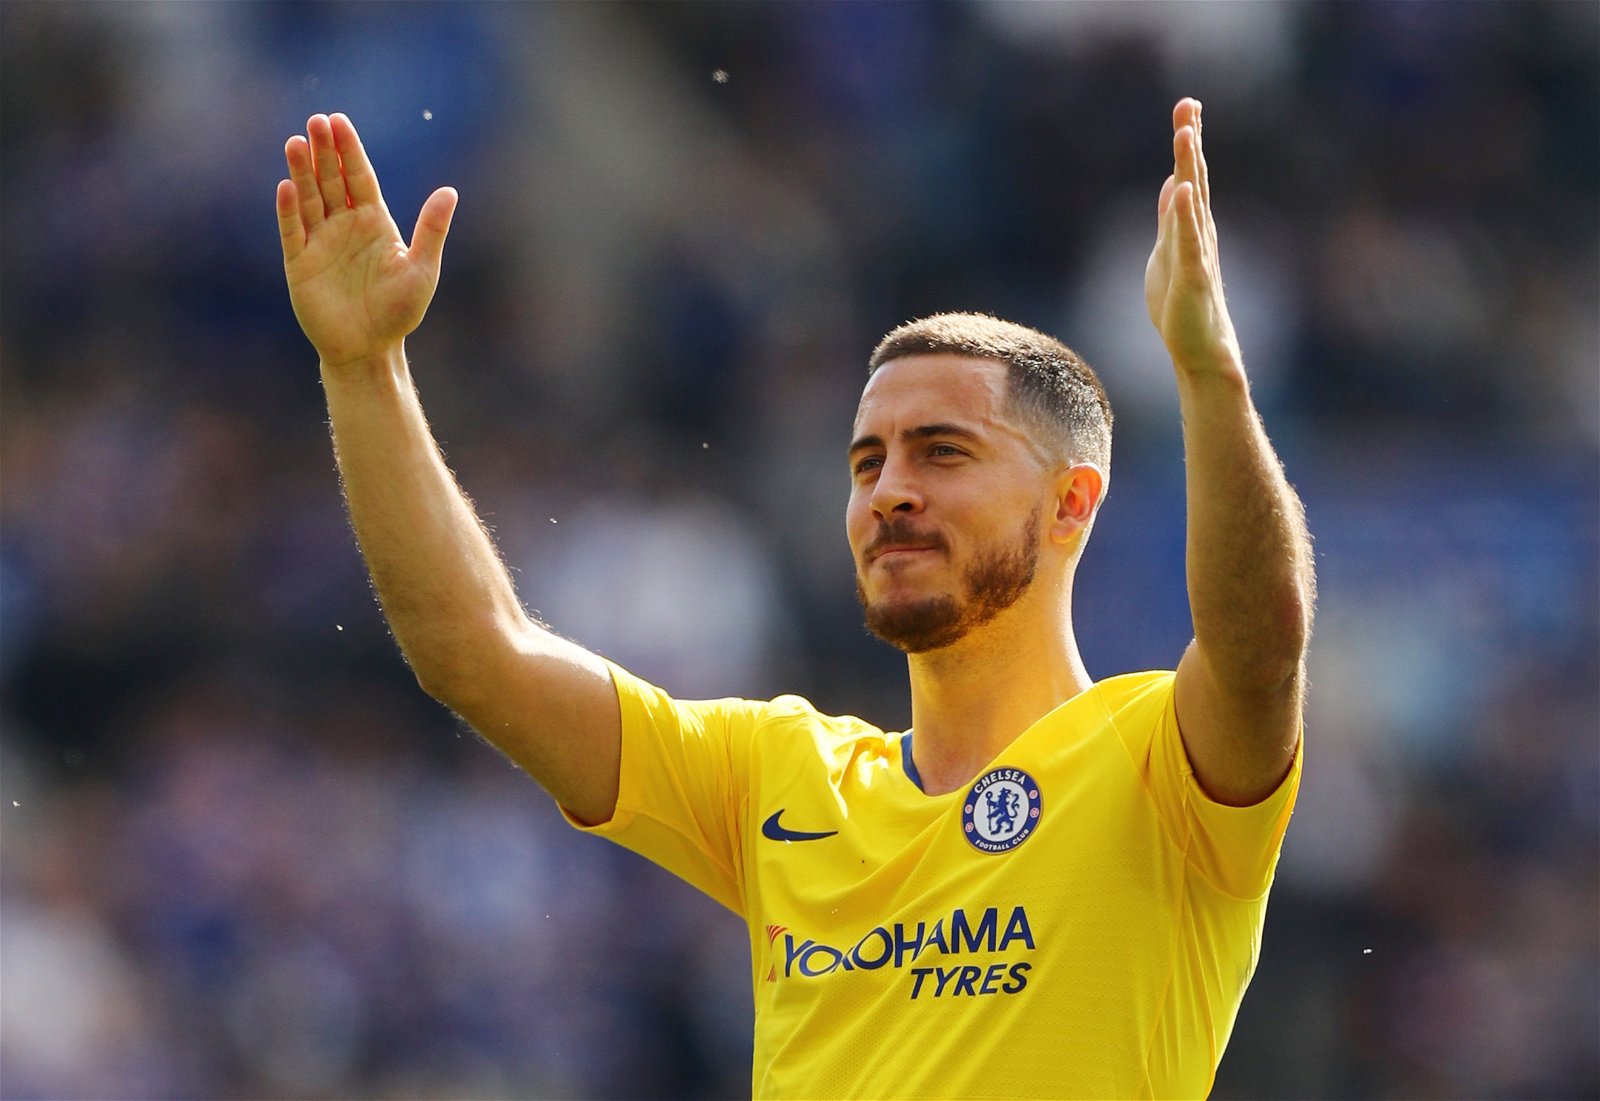 Chelsea legend backs the club to do well without Hazard